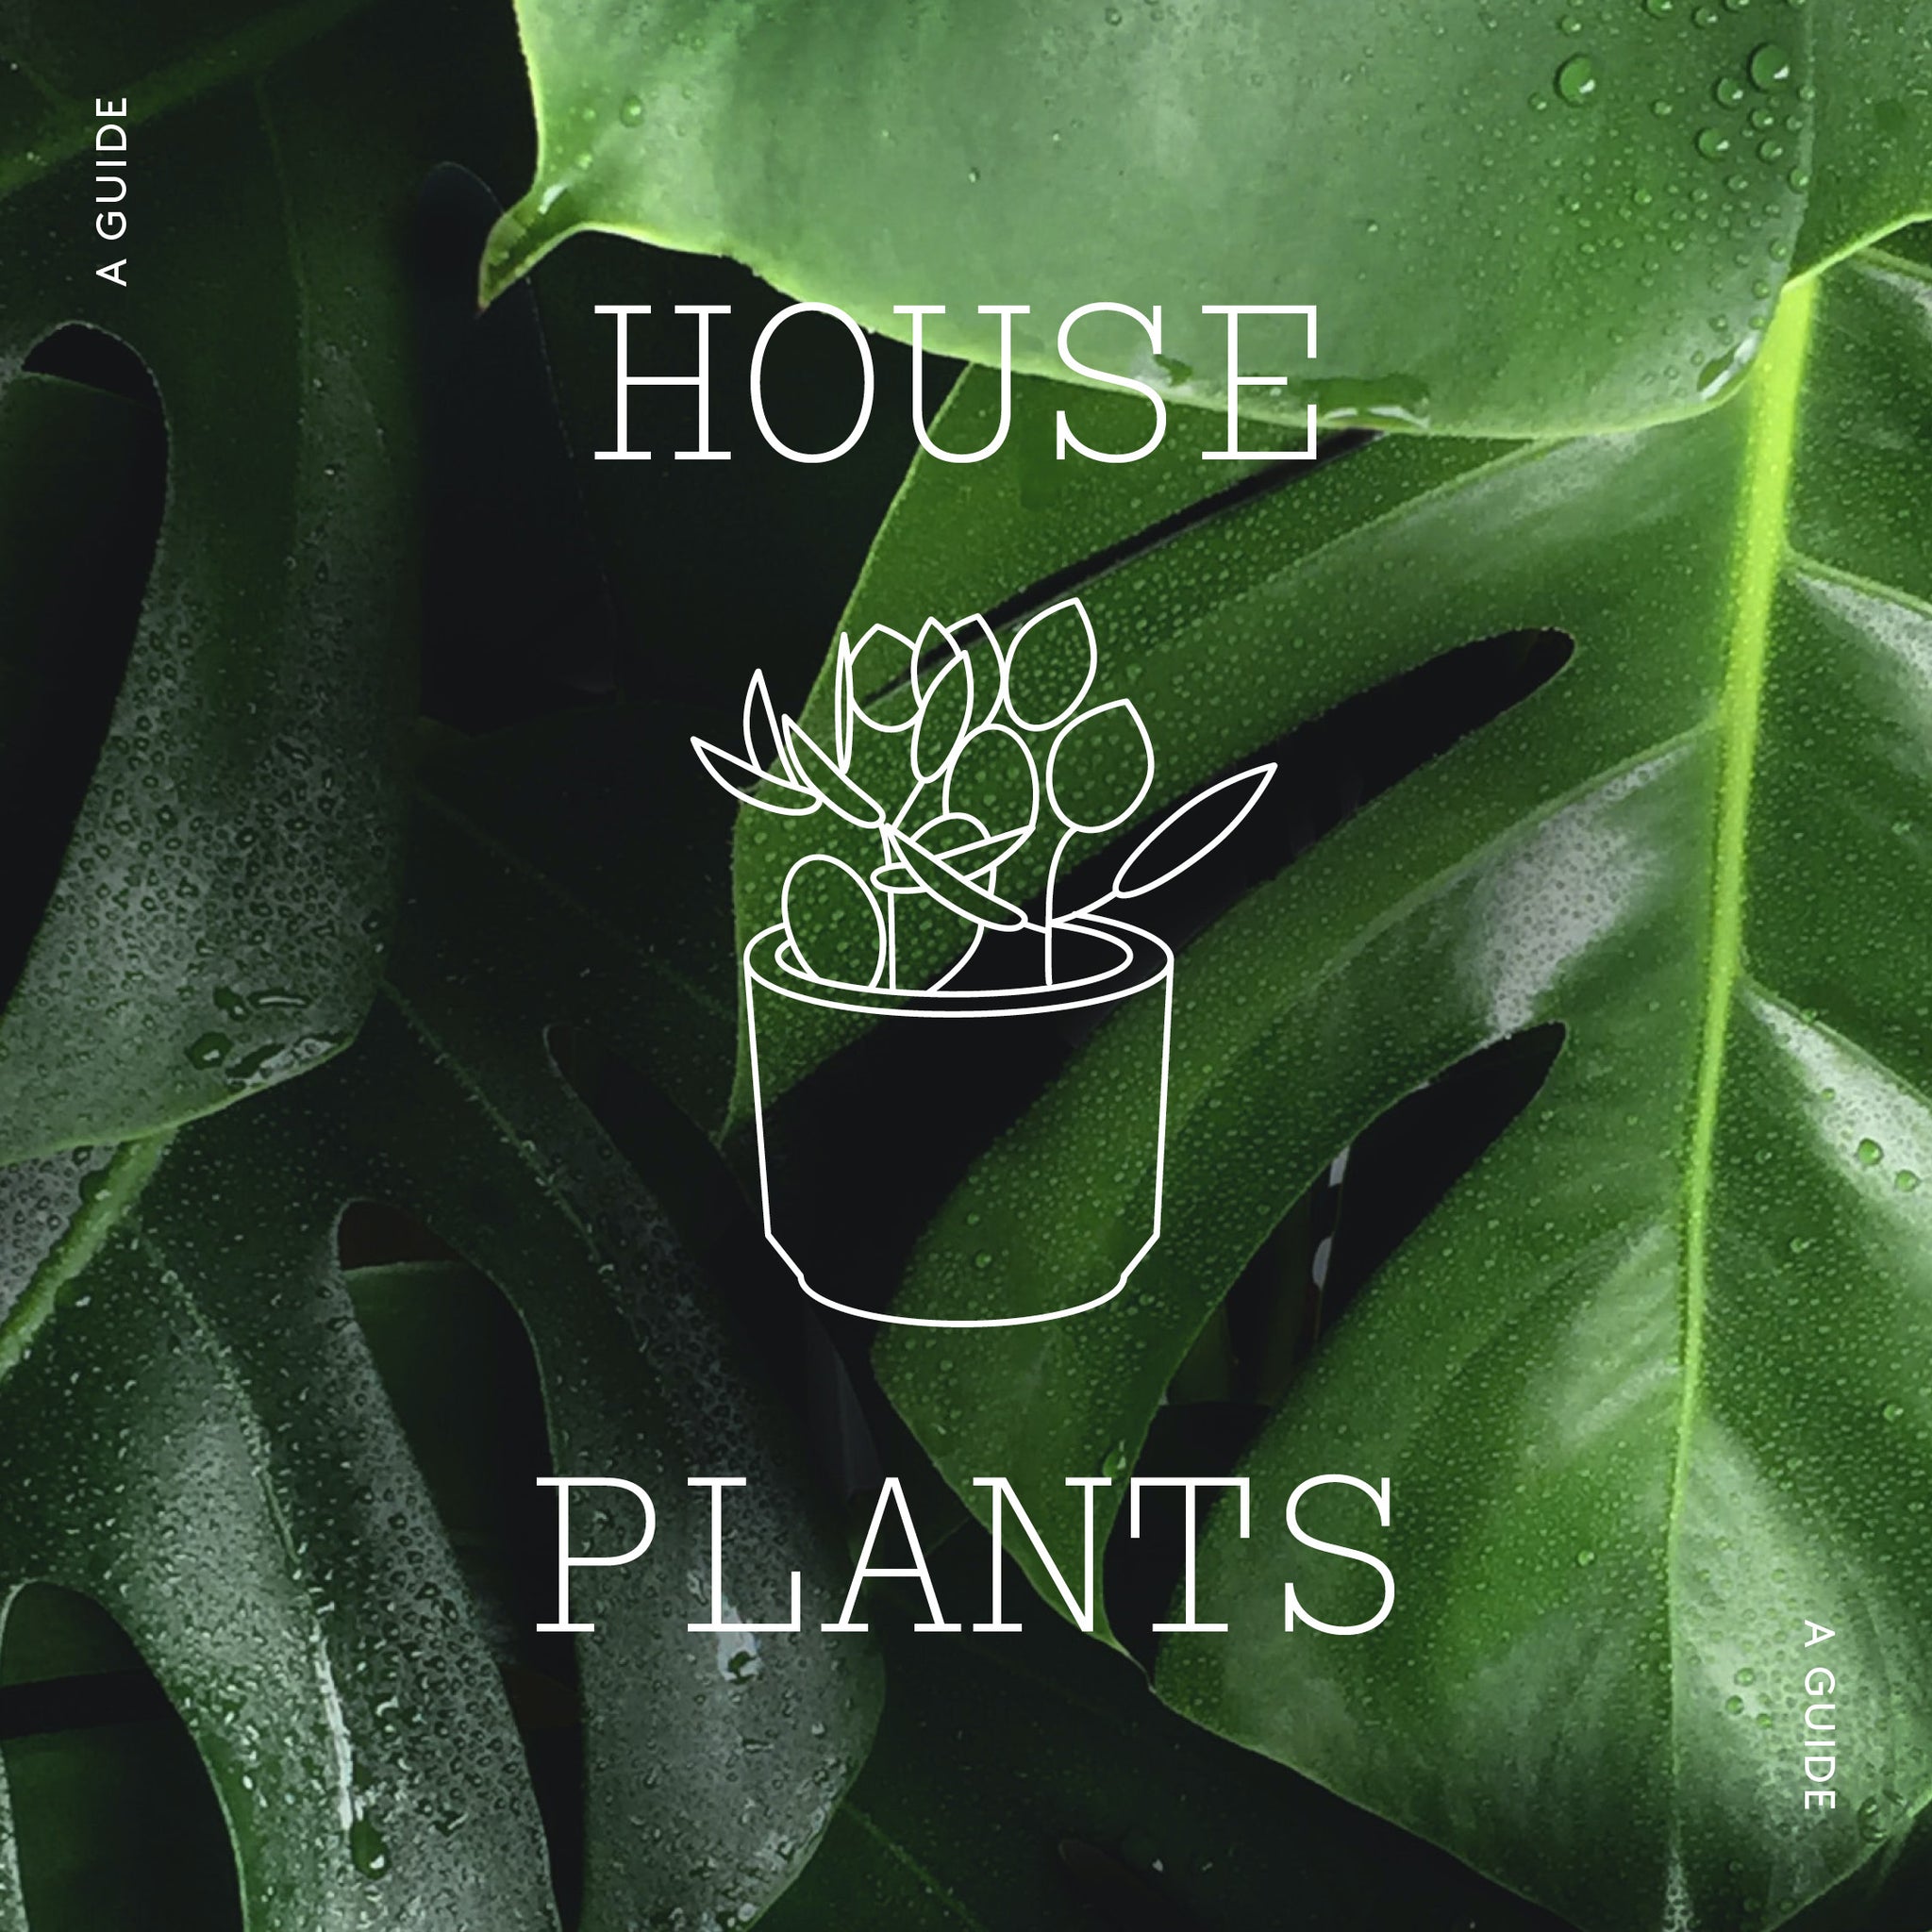 Improve your bedroom environment and sleep with these great houseplants.